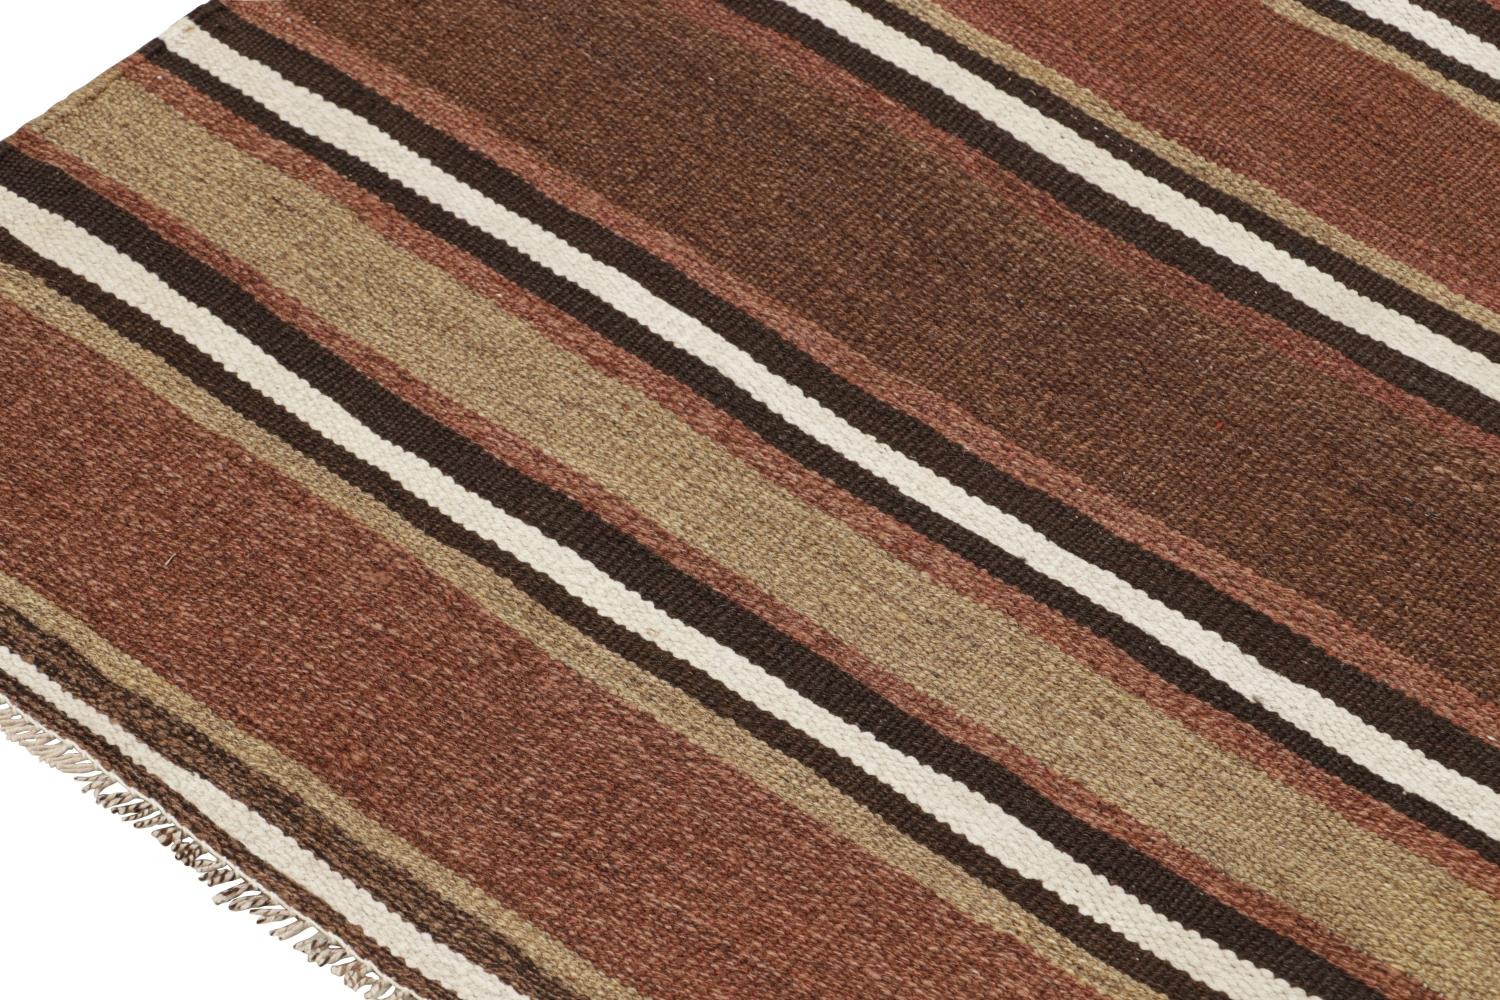 Mid-20th Century Vintage Shahsavan Persian Kilim in Beige-Brown & White Stripes For Sale